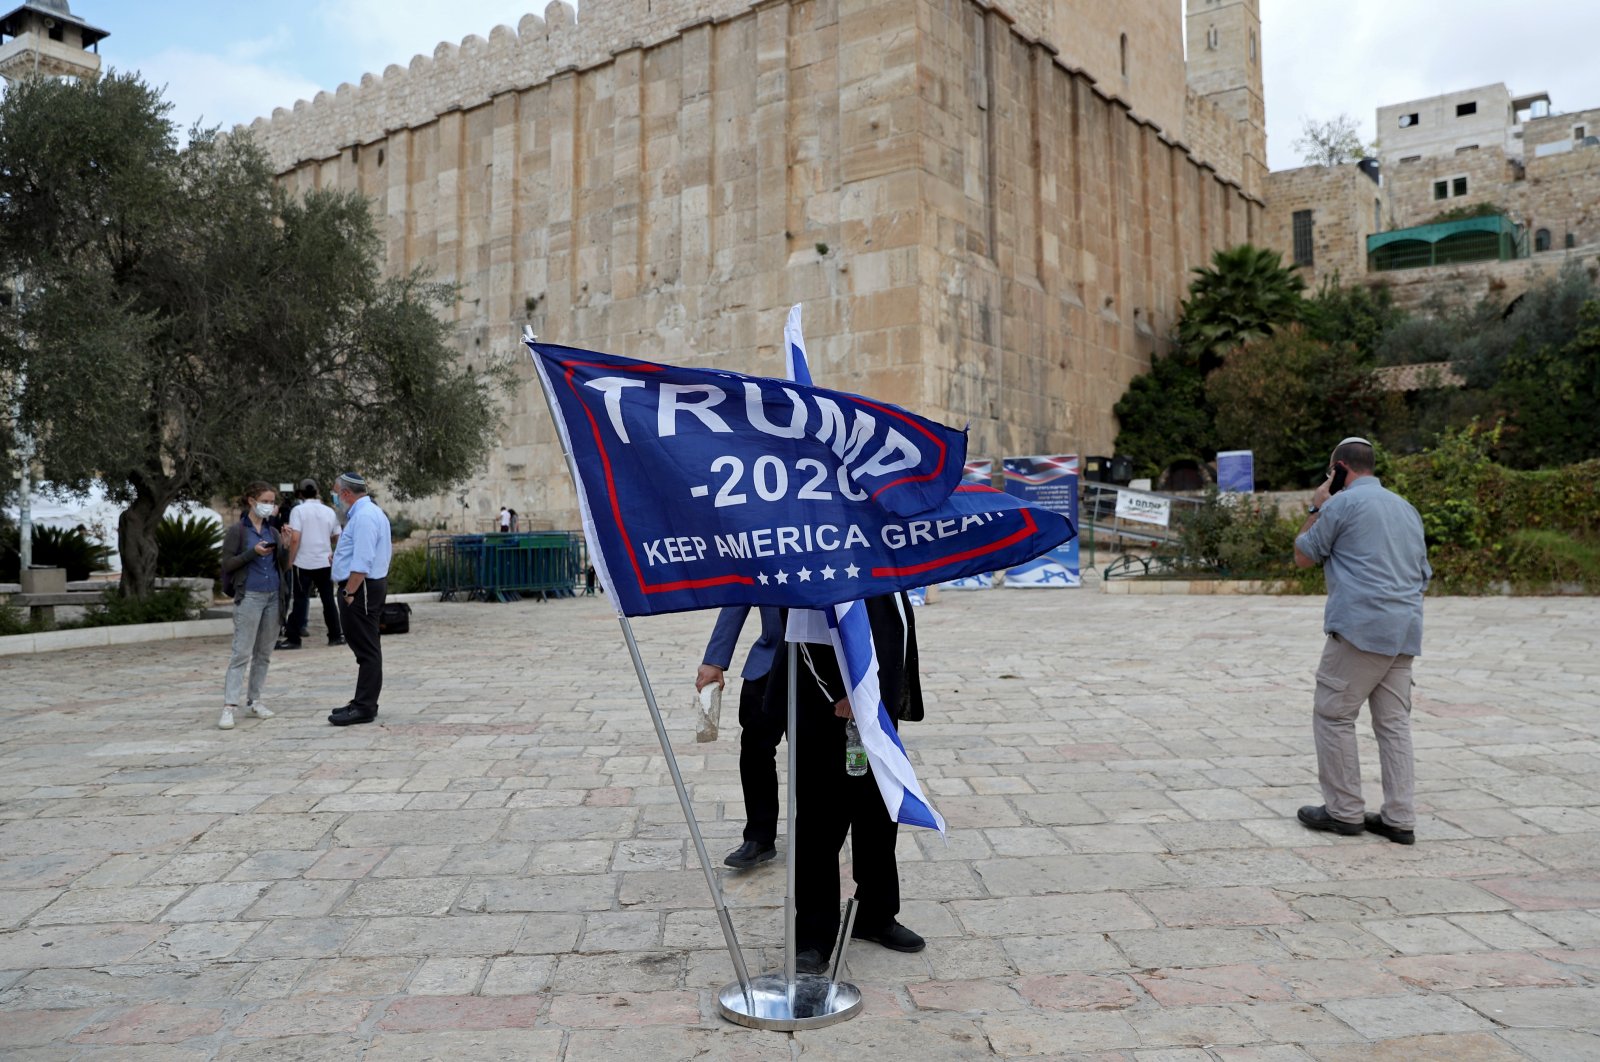 An Israeli settler adjusts a flag during a gathering to show support for U.S. President Donald Trump in the Israeli-occupied West Bank, Palestine, Nov. 2, 2020. (Reuters Photo)